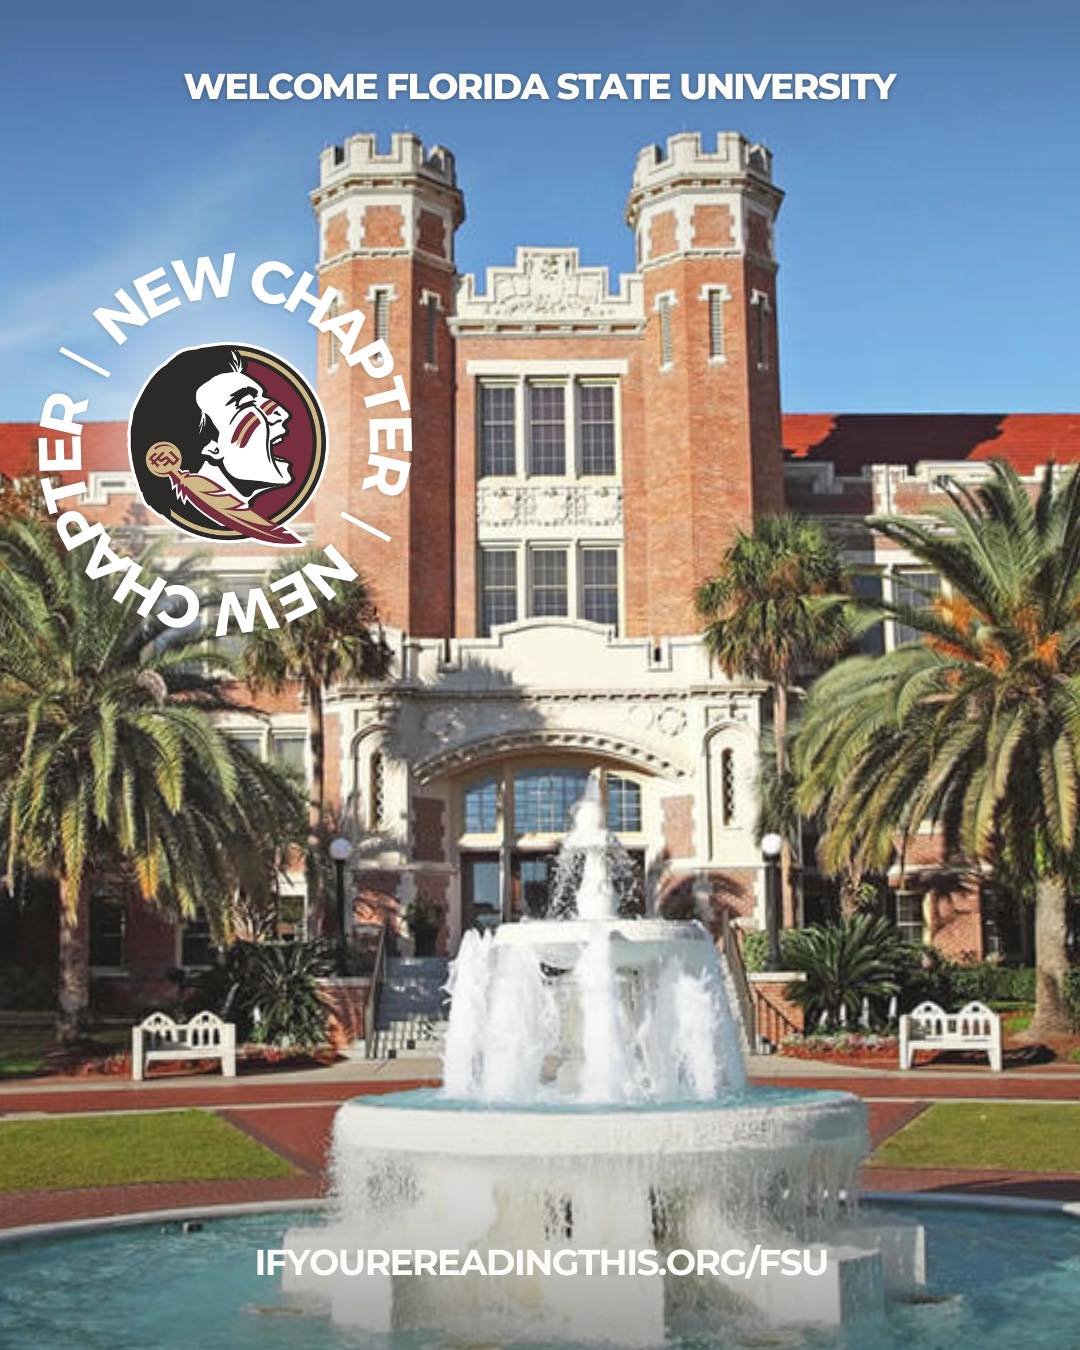 Enter @ifyourereadingthisfsu! Swipe to learn more about our newest chapter ✉️ Noles say hey in the comments ⬇️